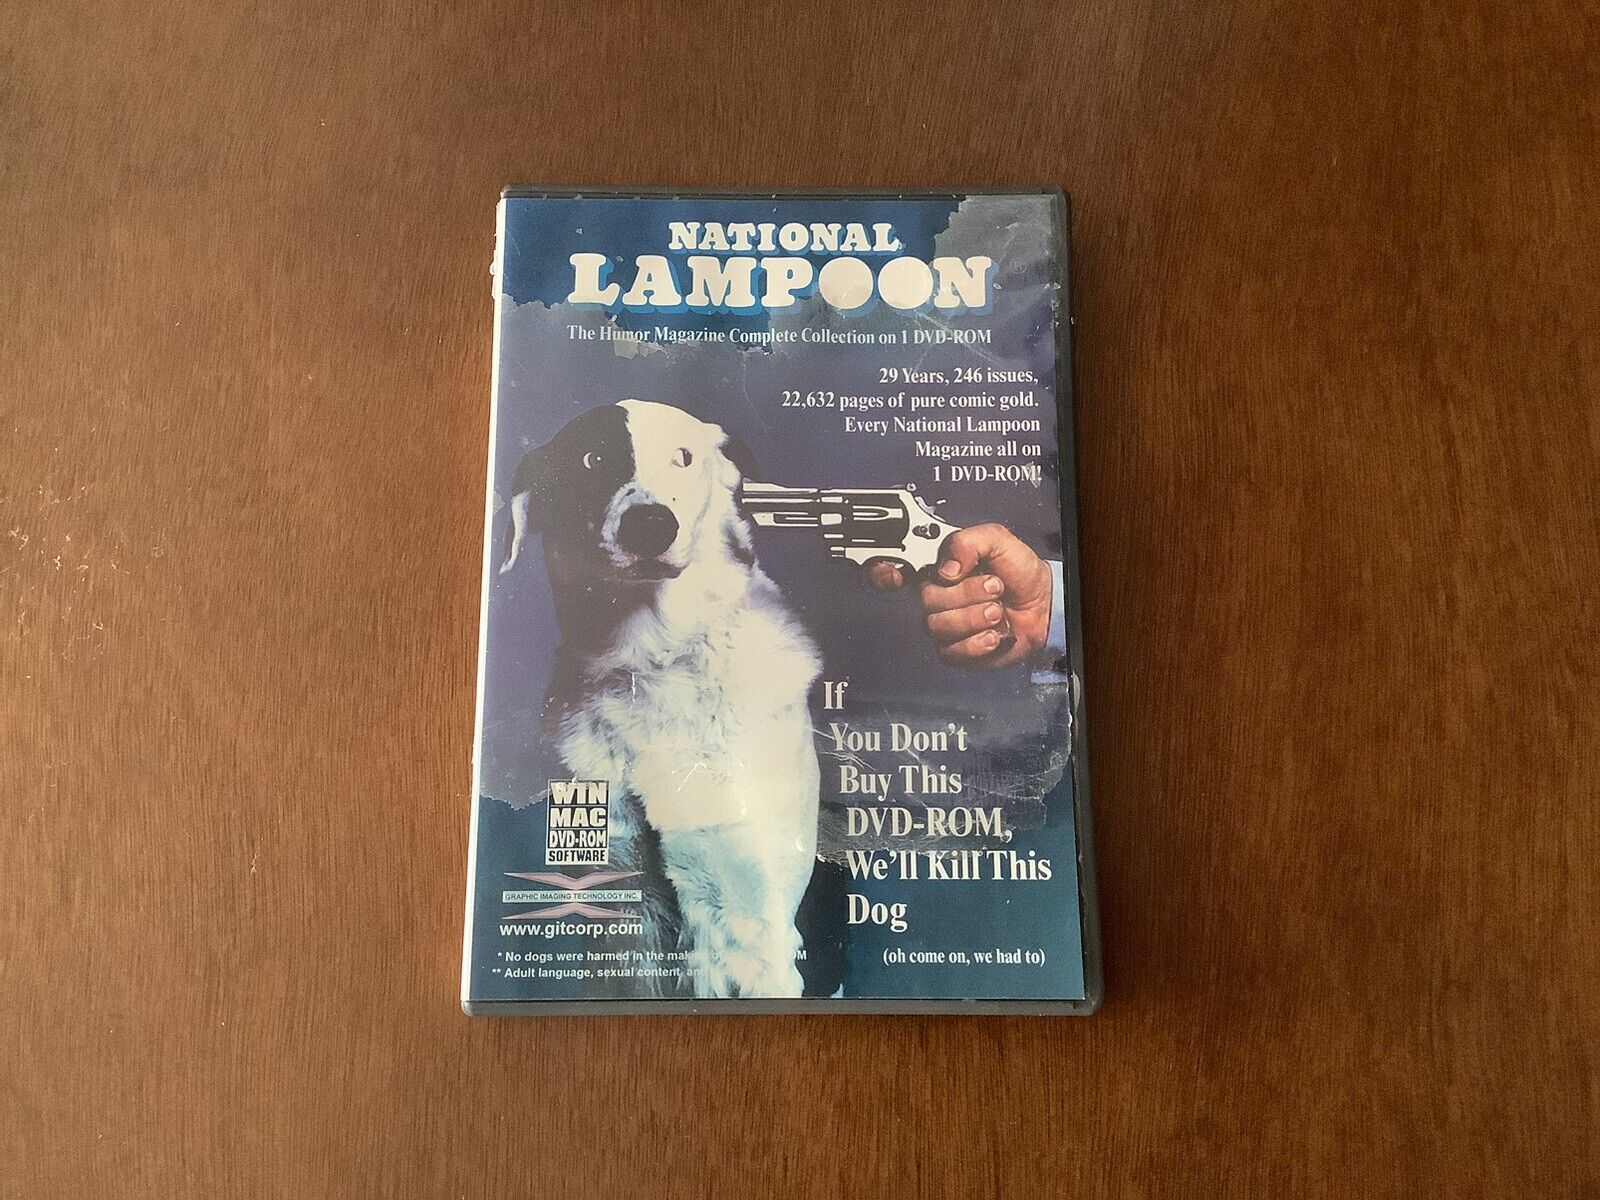 National Lampoon DVD-Rom Complete 246 Issue Digital Magazine Collection, Humor